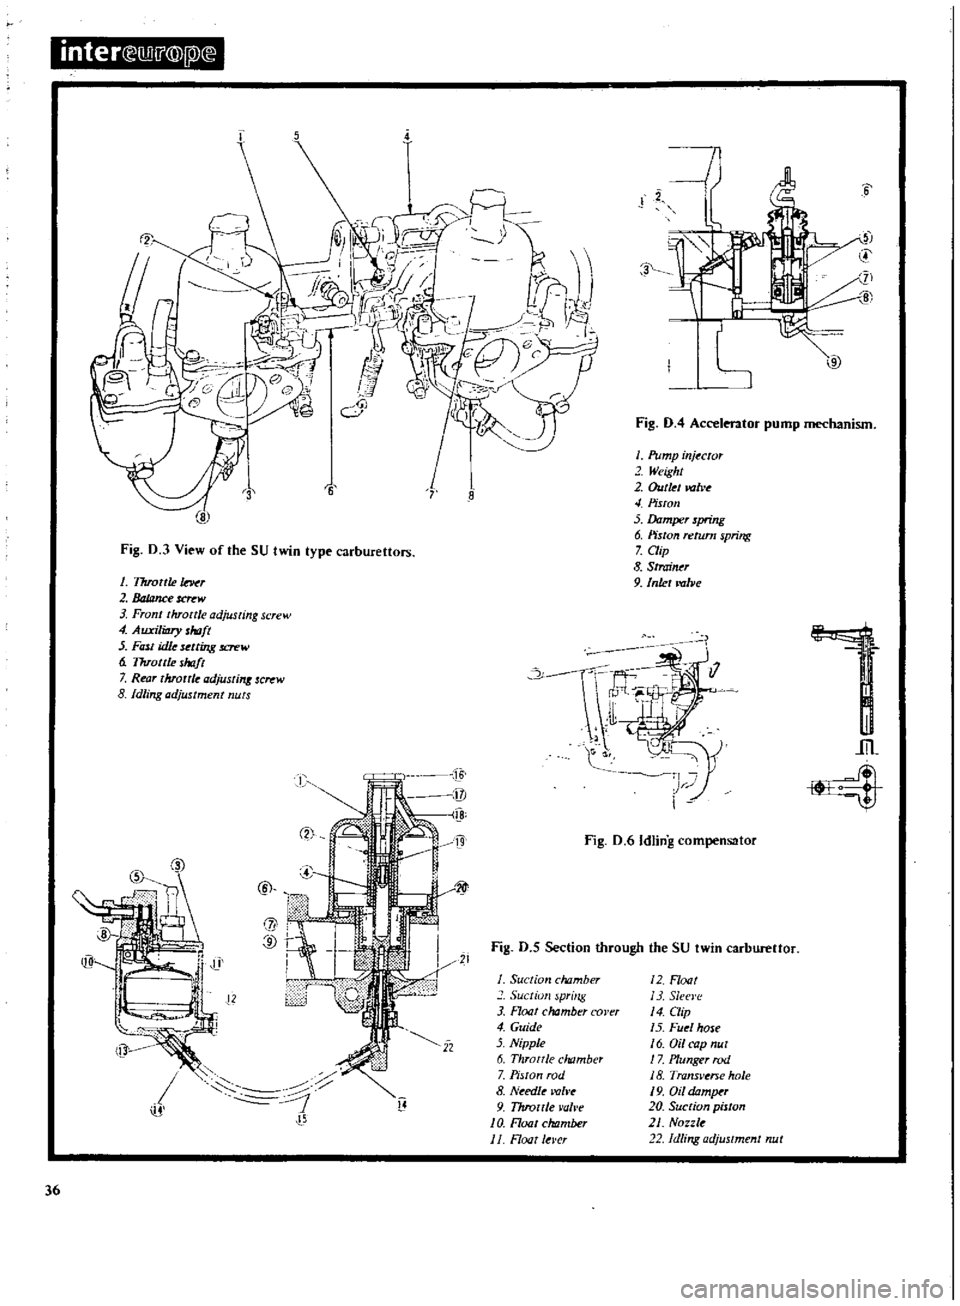 DATSUN 510 1969  Service Owners Guide 
inter 
ill 
j

@
pl

T 
i

5

12

Fig 
D 
3

View 
of 
the 
SU 
twin

type 
carburettors

1

Throttle 
r

2 
JaJana

crew

Front 
throttle

adjusting 
screw

4

AuxiliDry 
shoft

5 
Ftnt 
idle

selli